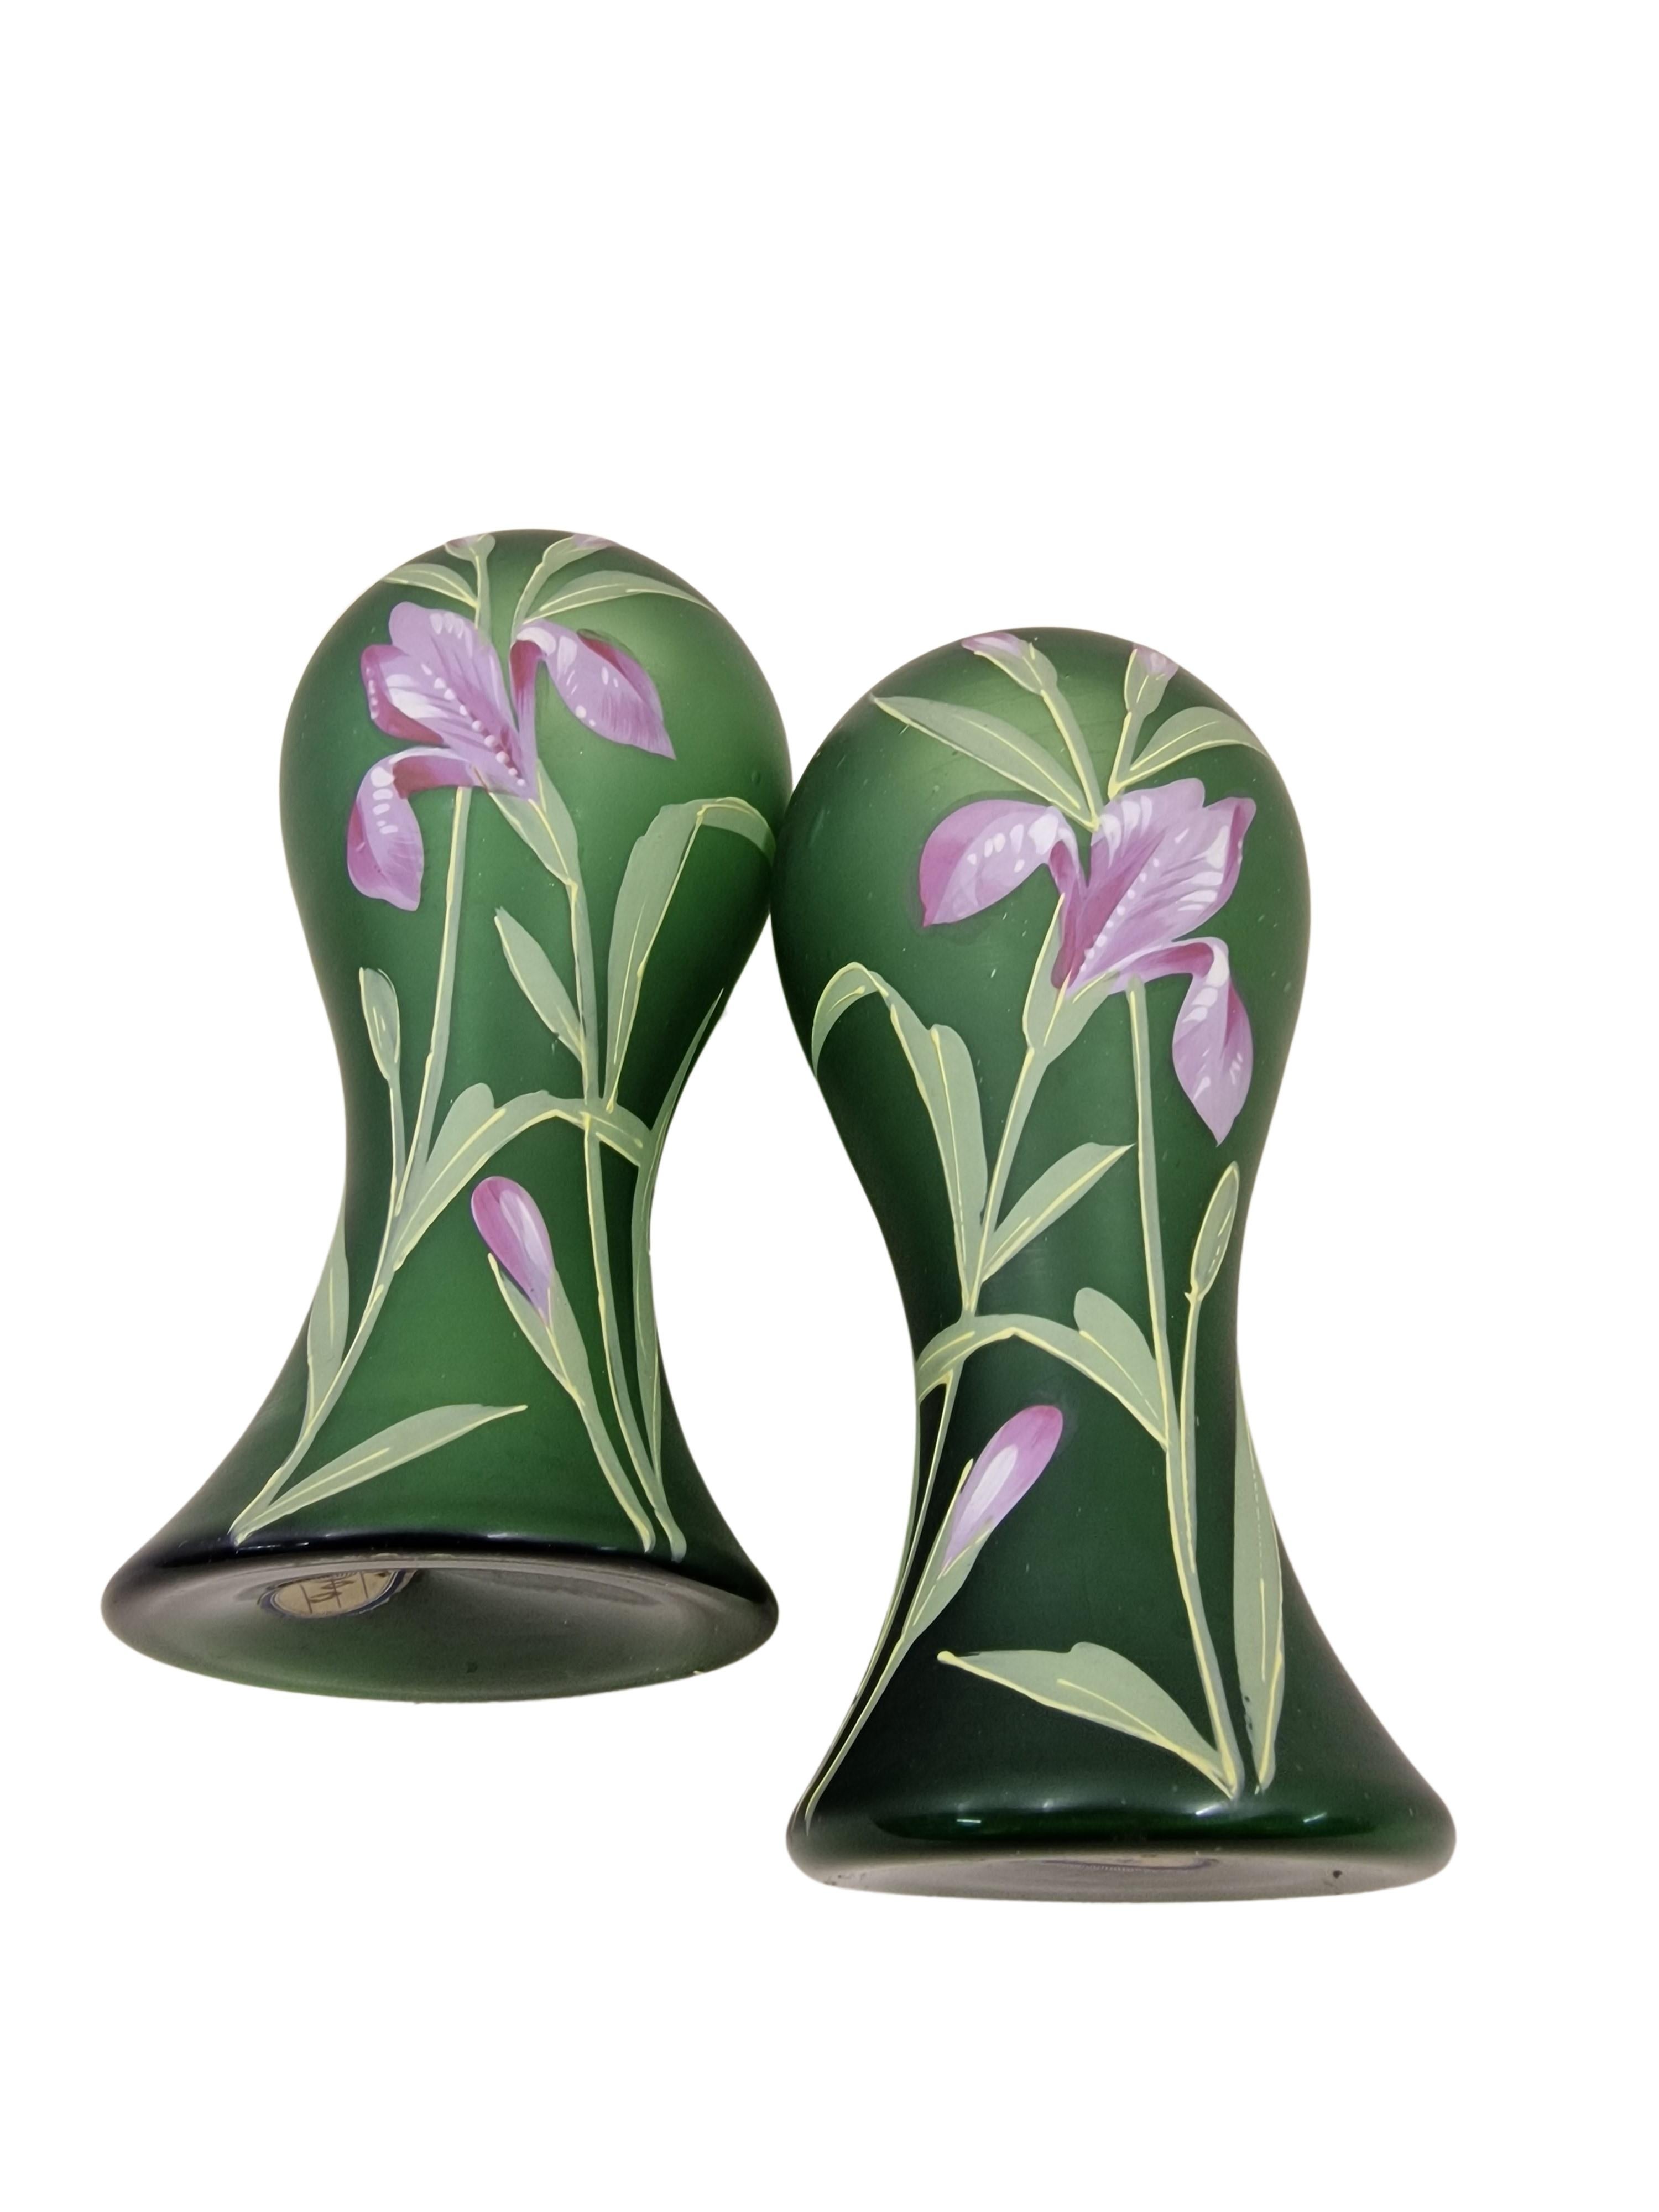 Pair of very decorative vases, from the Art Nouveau / Jugendstil era from the famous verrerie Legras, France. 
This two vases are of thick green, high quality glass. 
The vases have a round basic shape that tapers towards the top and then becomes